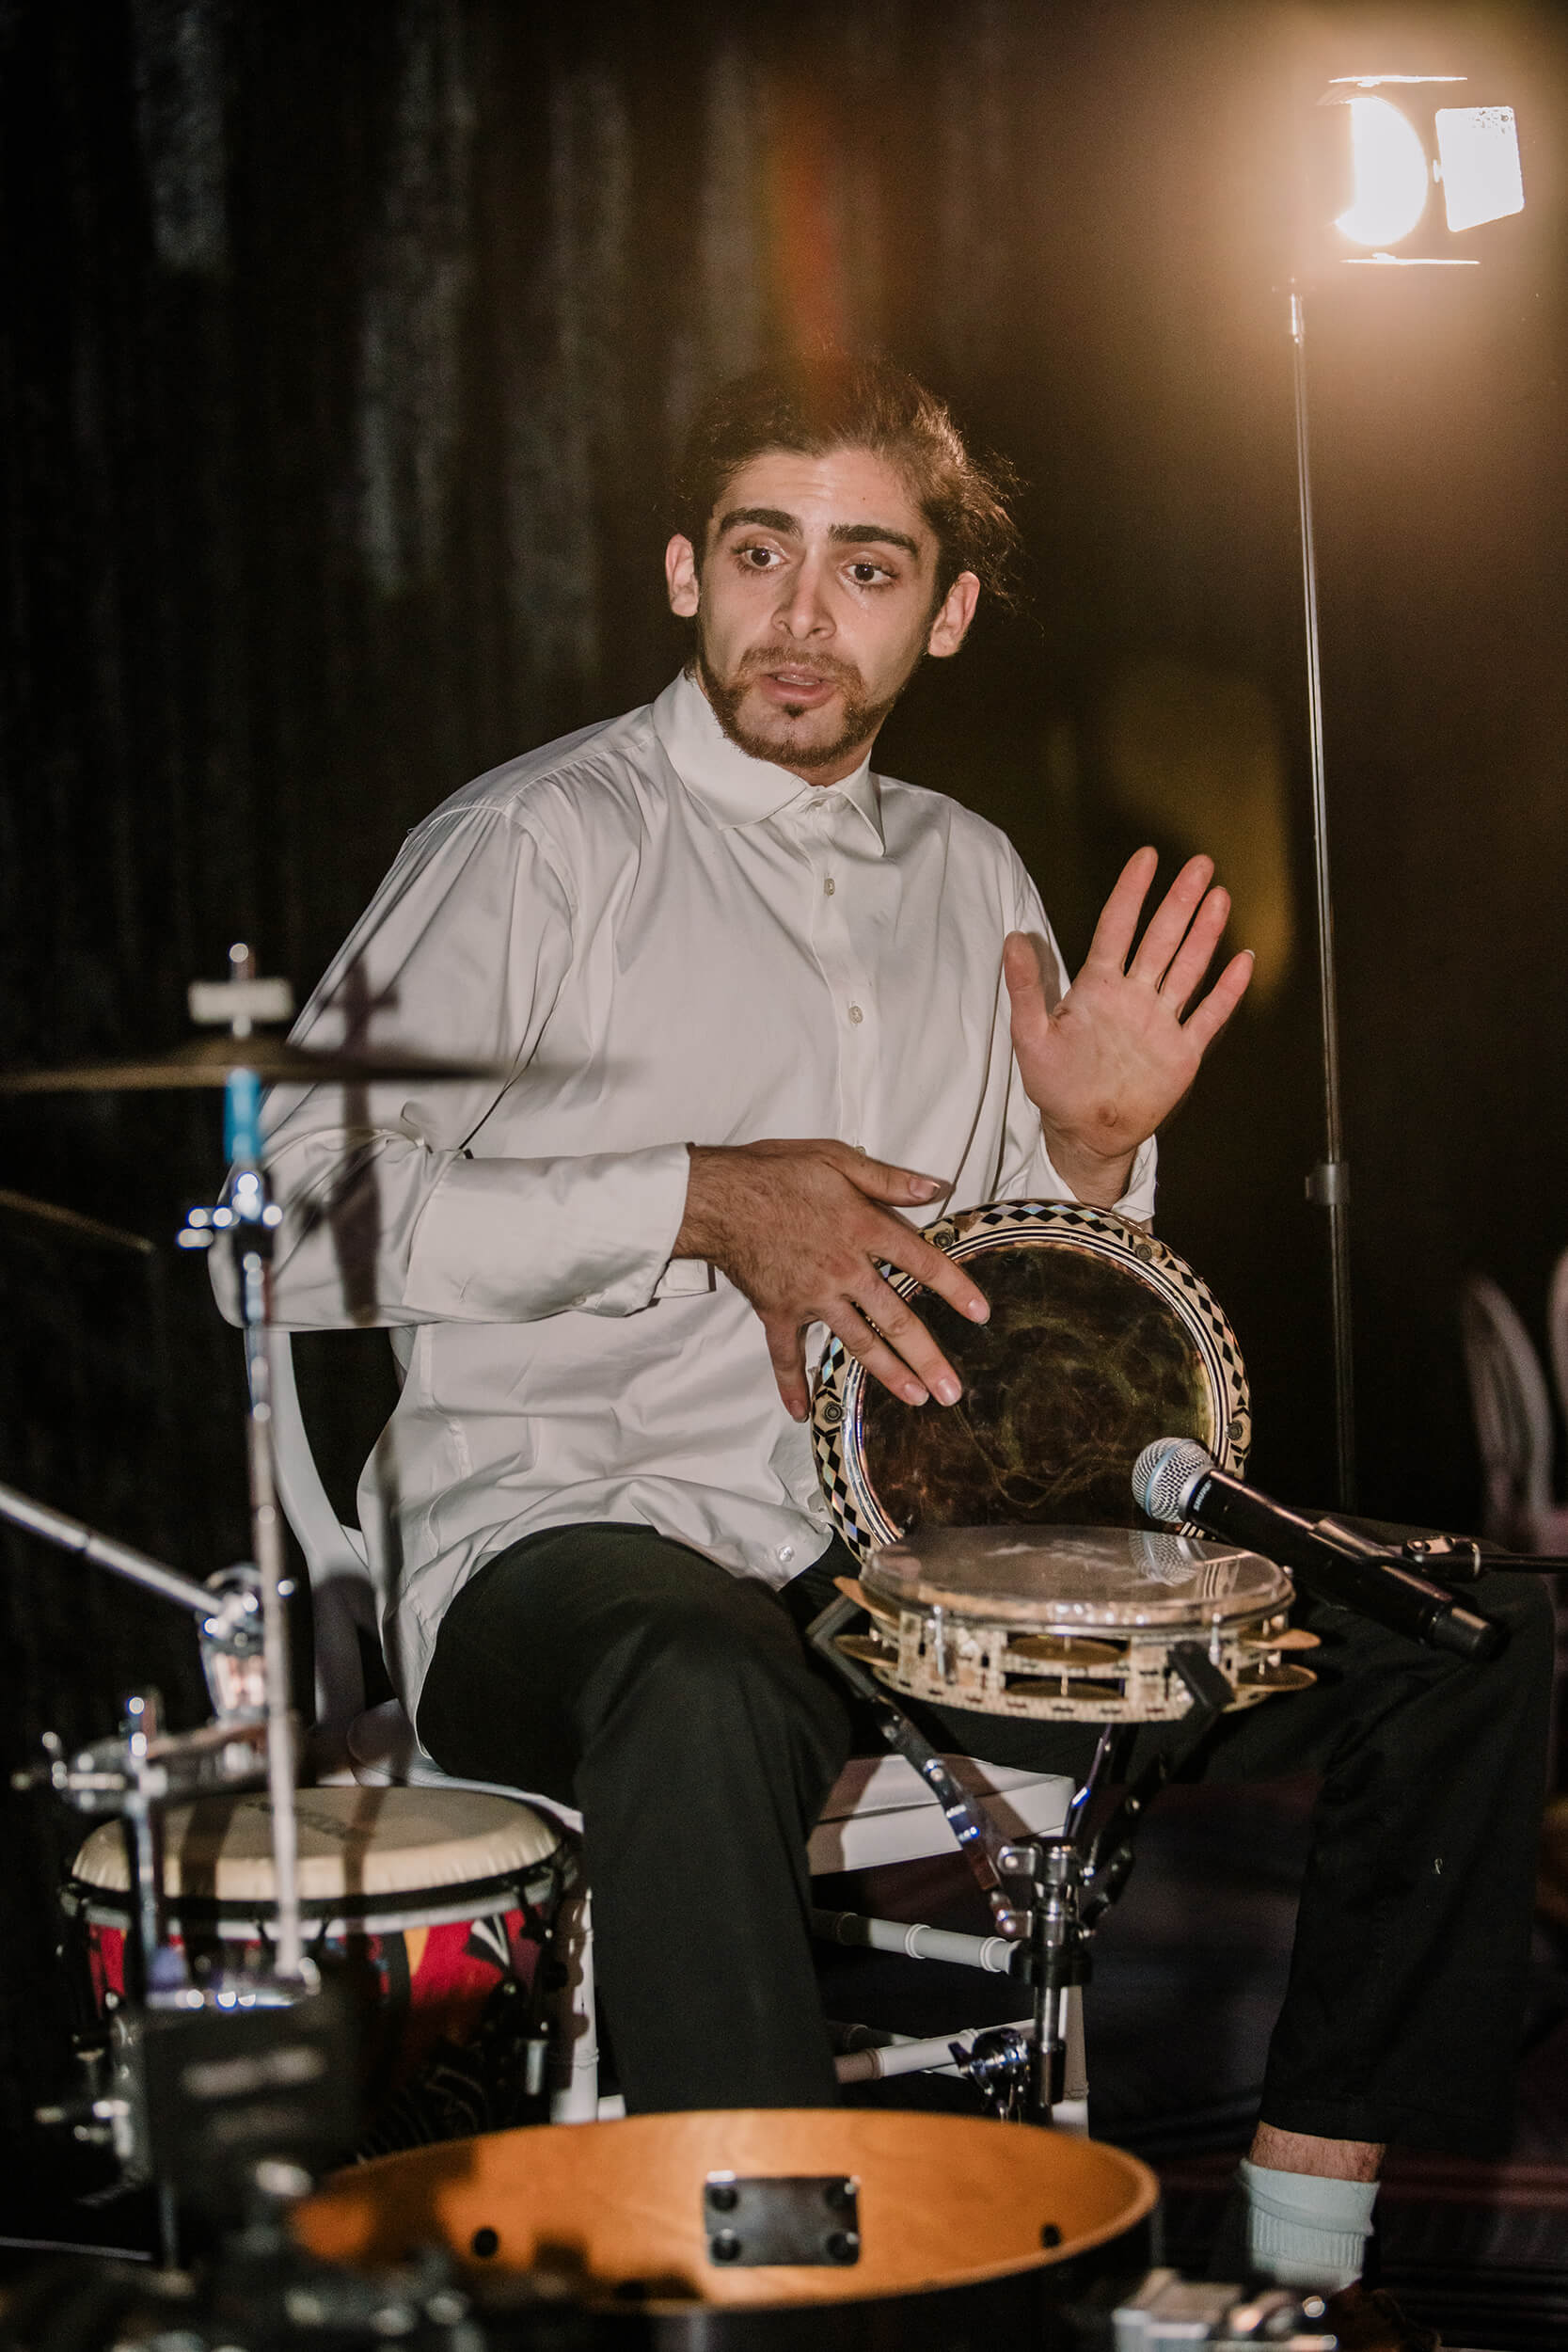 Live percussions as newlyweds are dancing, captured by Black Avenue Productions